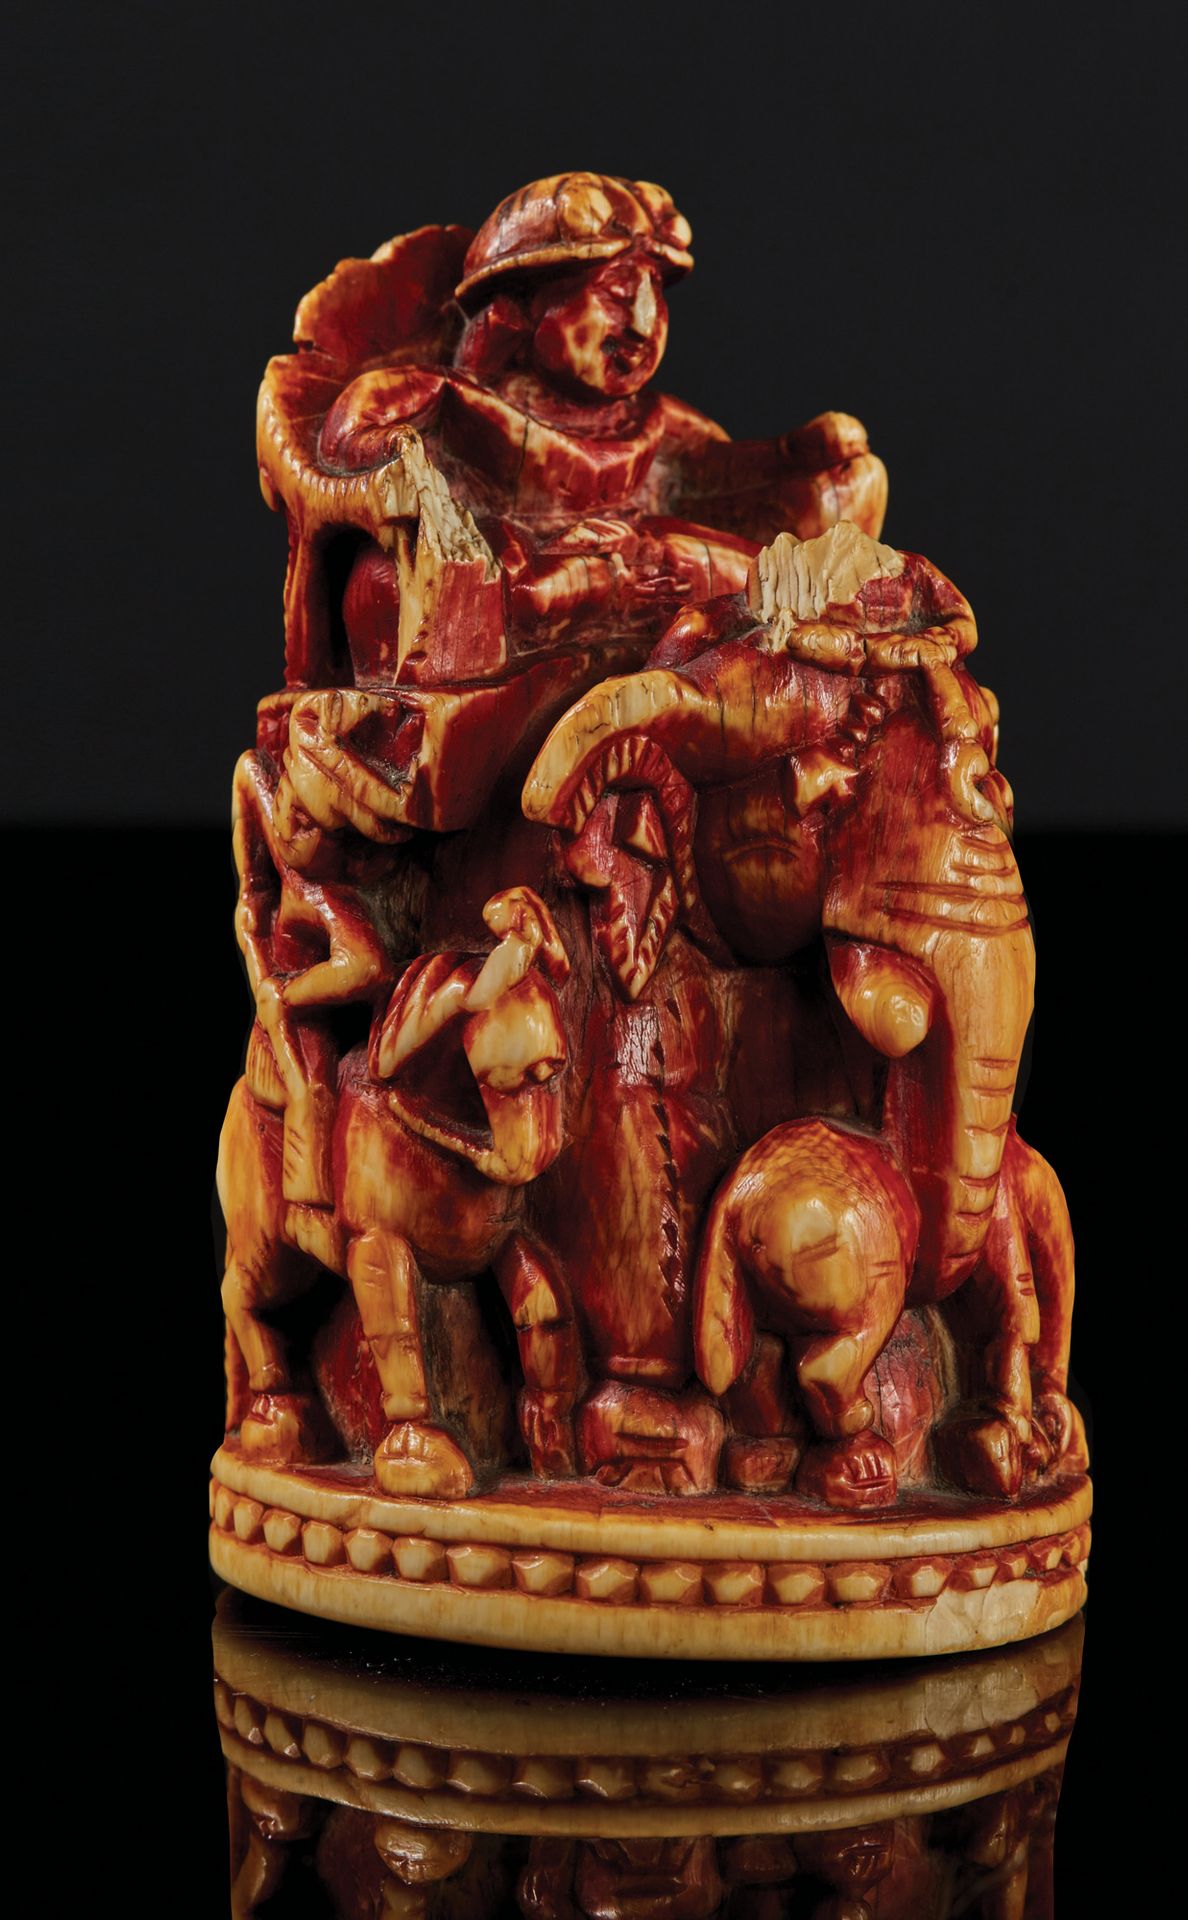 Null Chess pawn "with elephant" in marine ivory carved in the round and monochro&hellip;